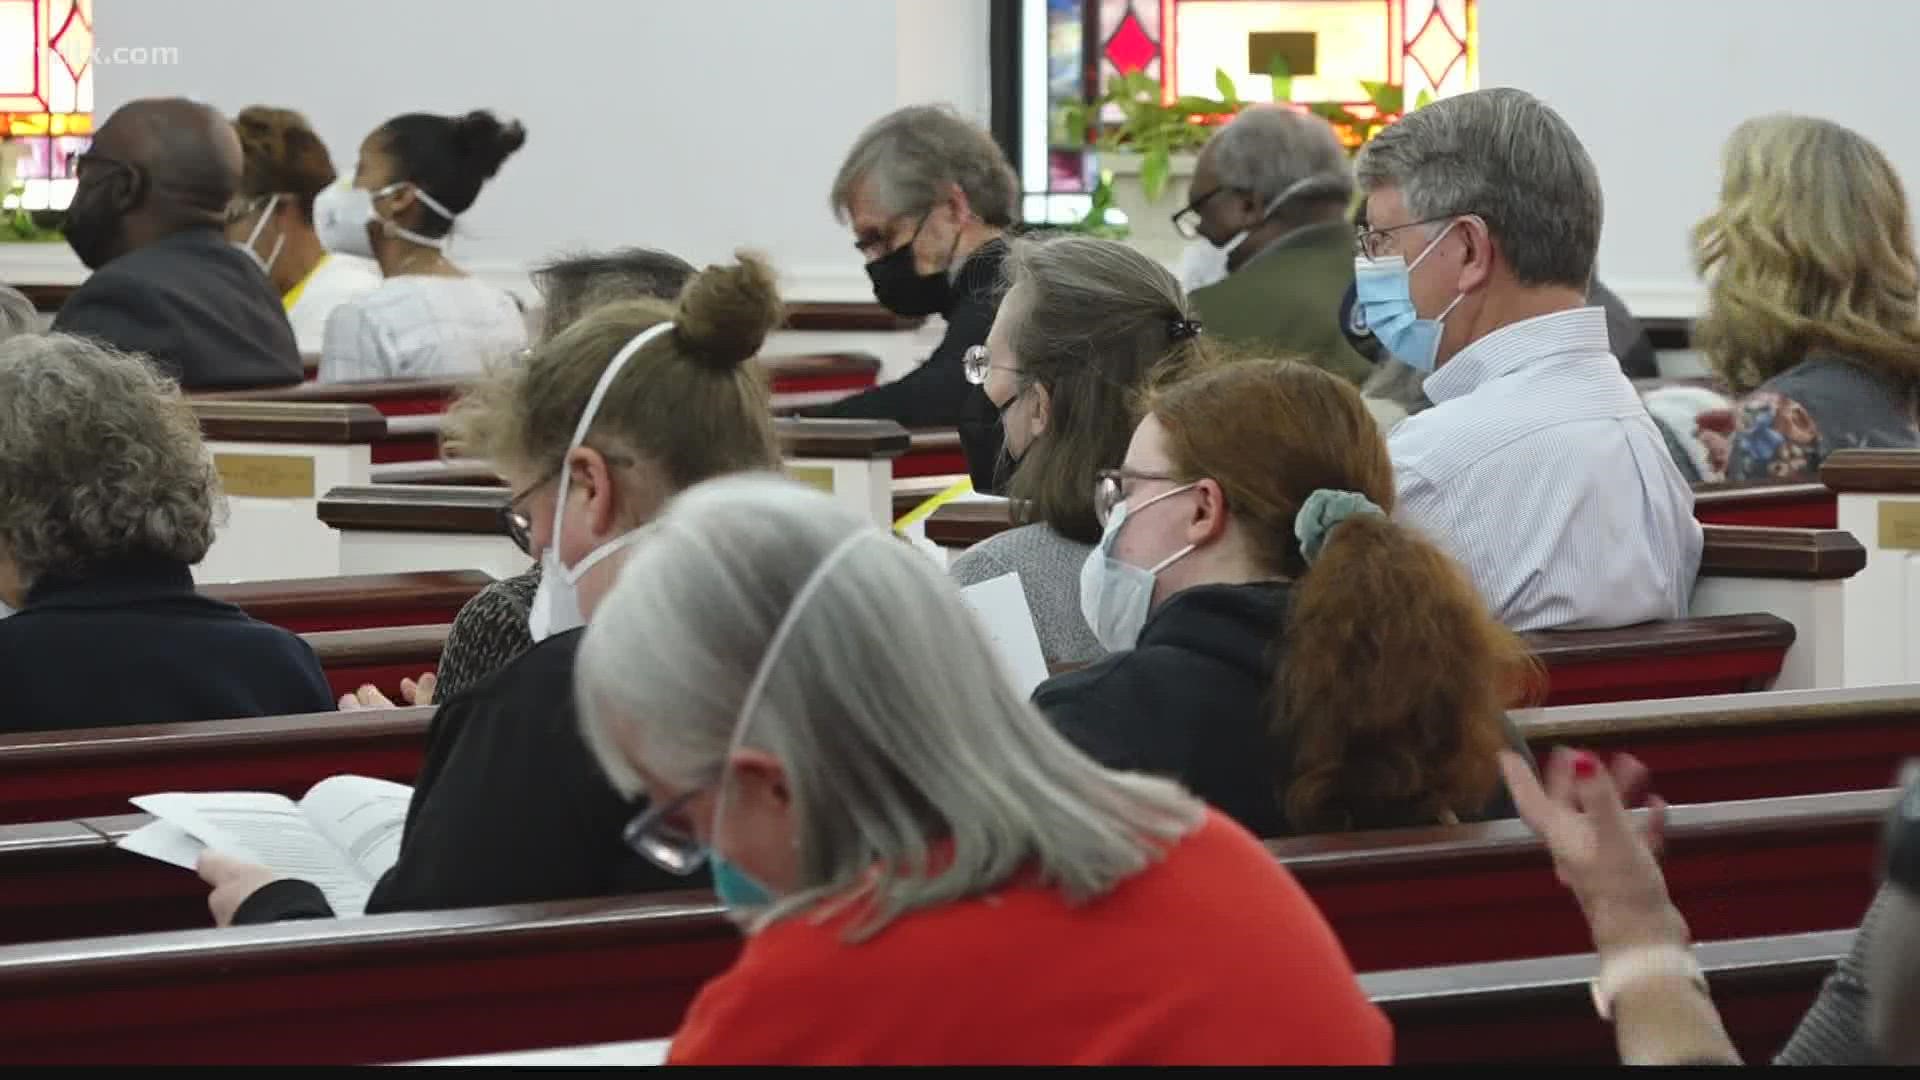 More than 200 people from all religious backgrounds met Tuesday to discuss solutions for reducing gun violence and improving affordable housing.